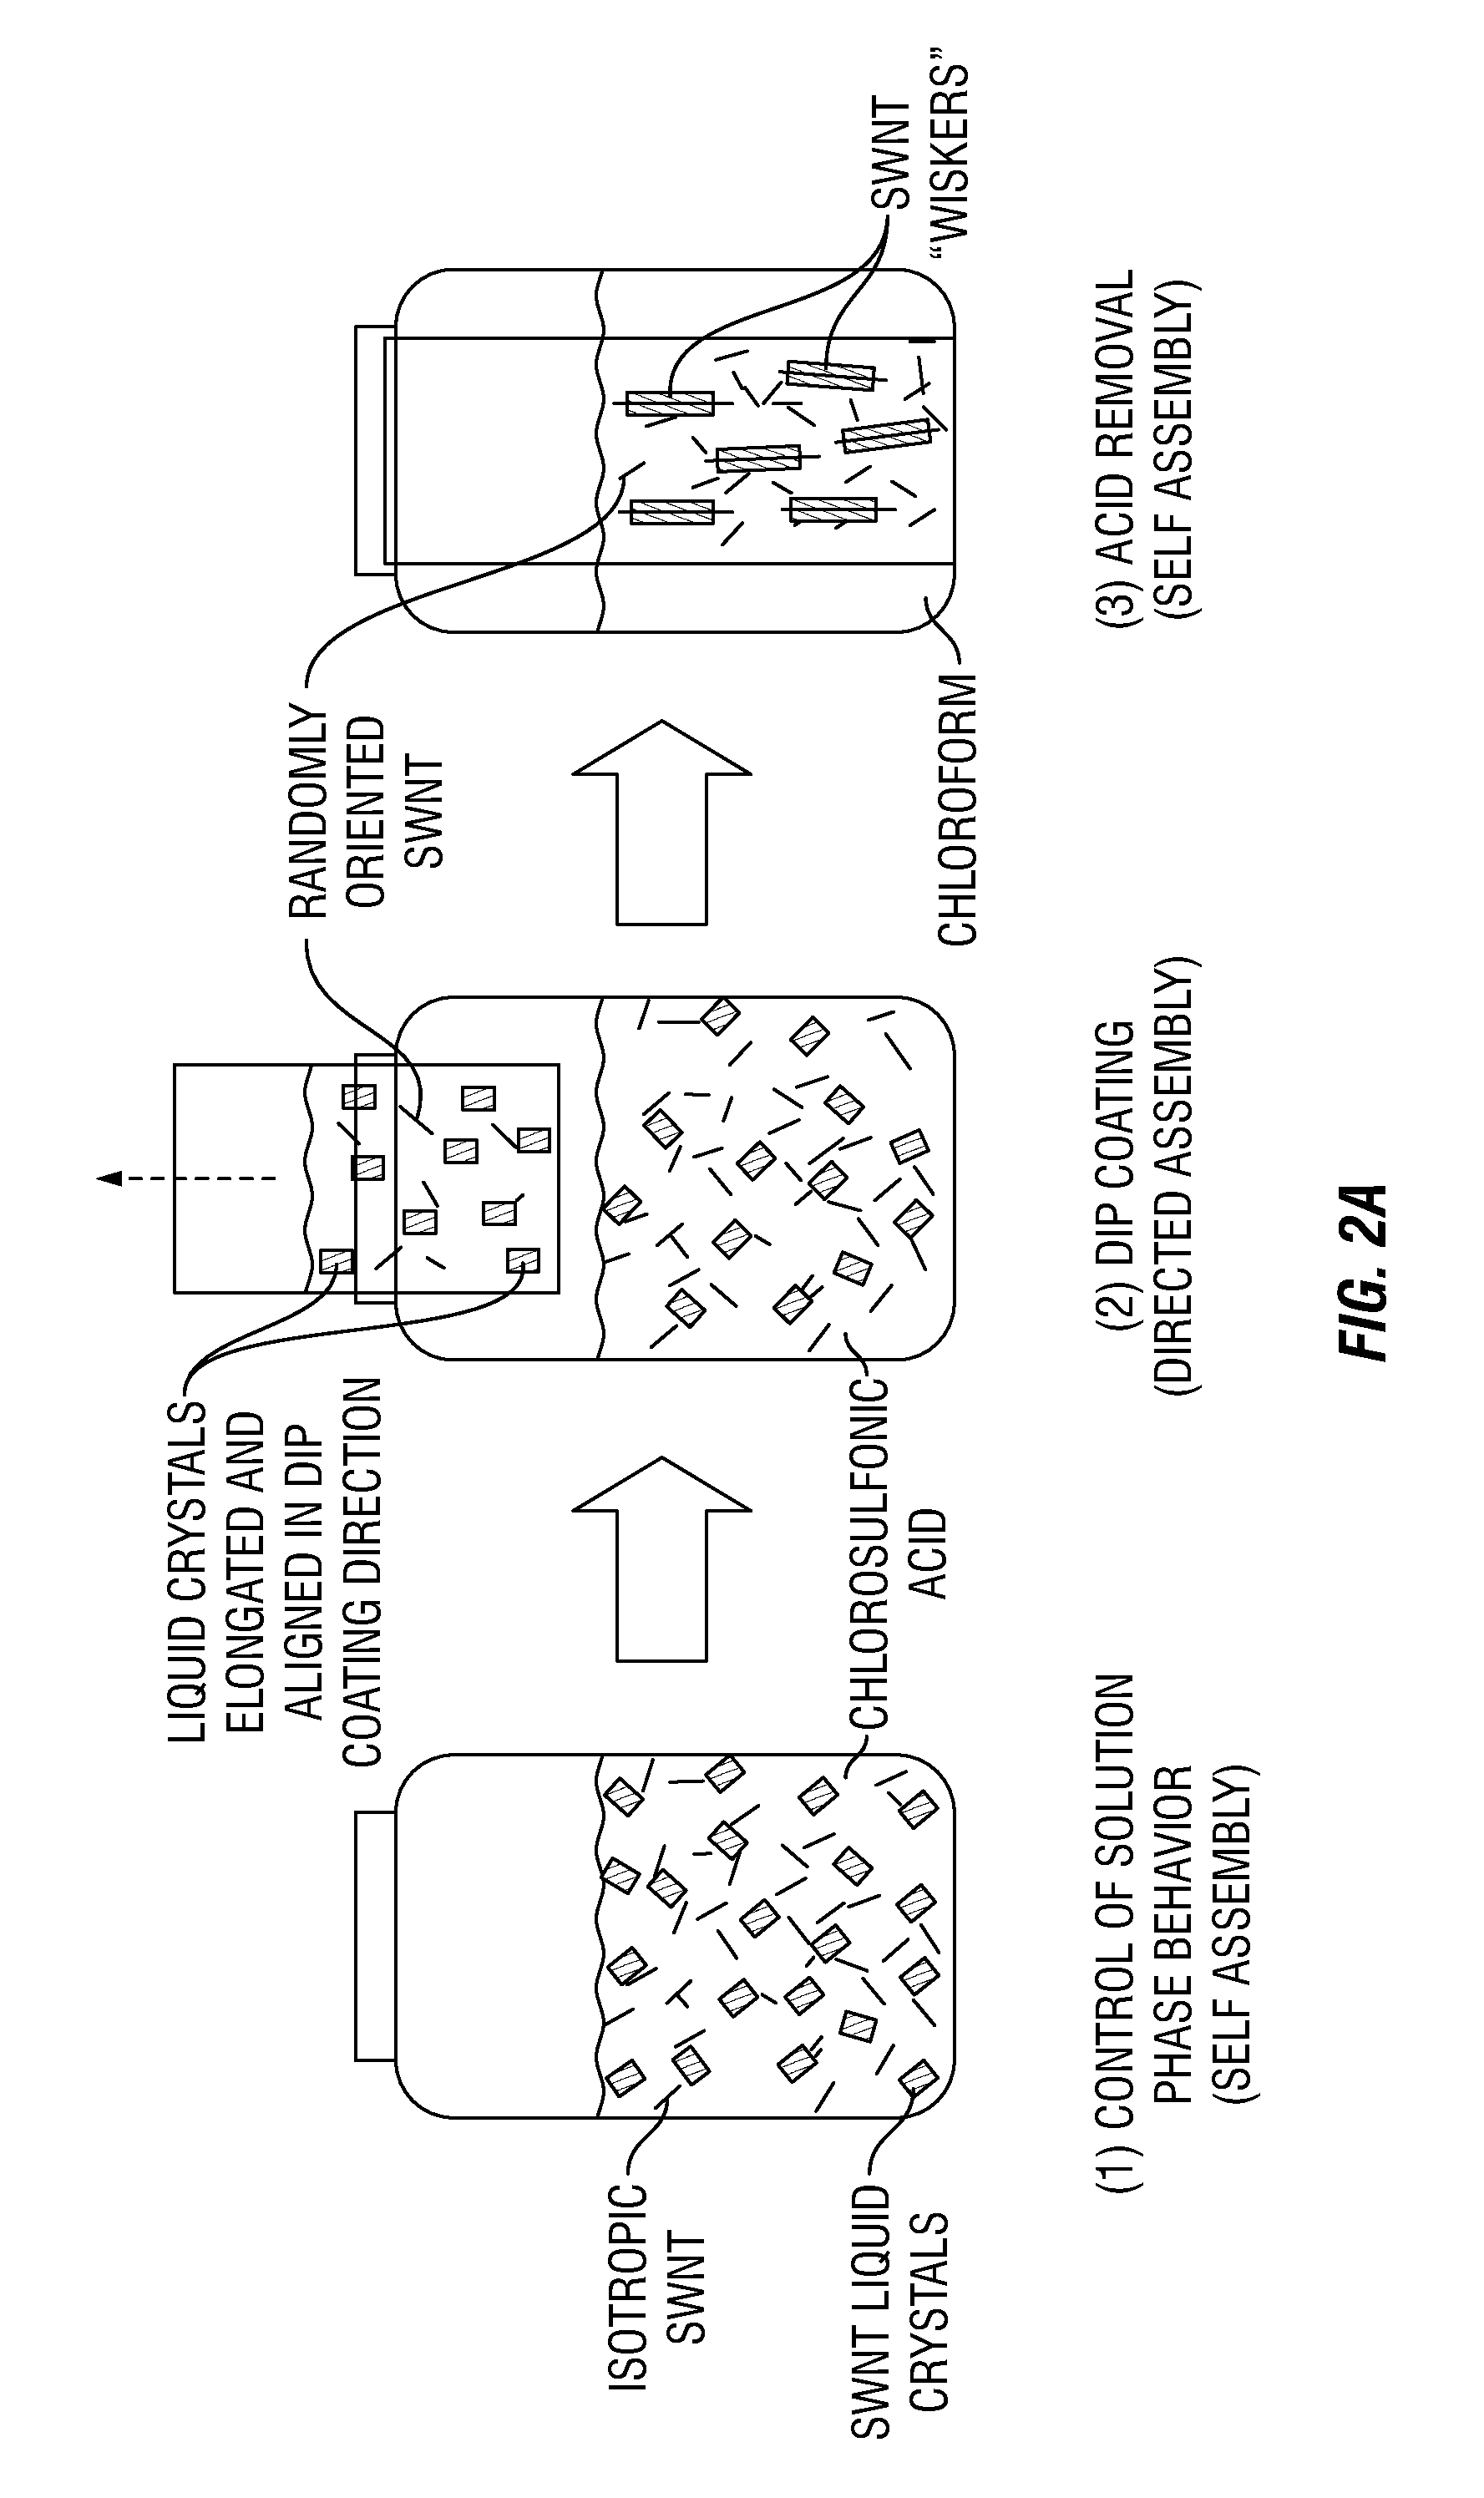 Carbon nanotube films processed from strong acid solutions and methods for production thereof